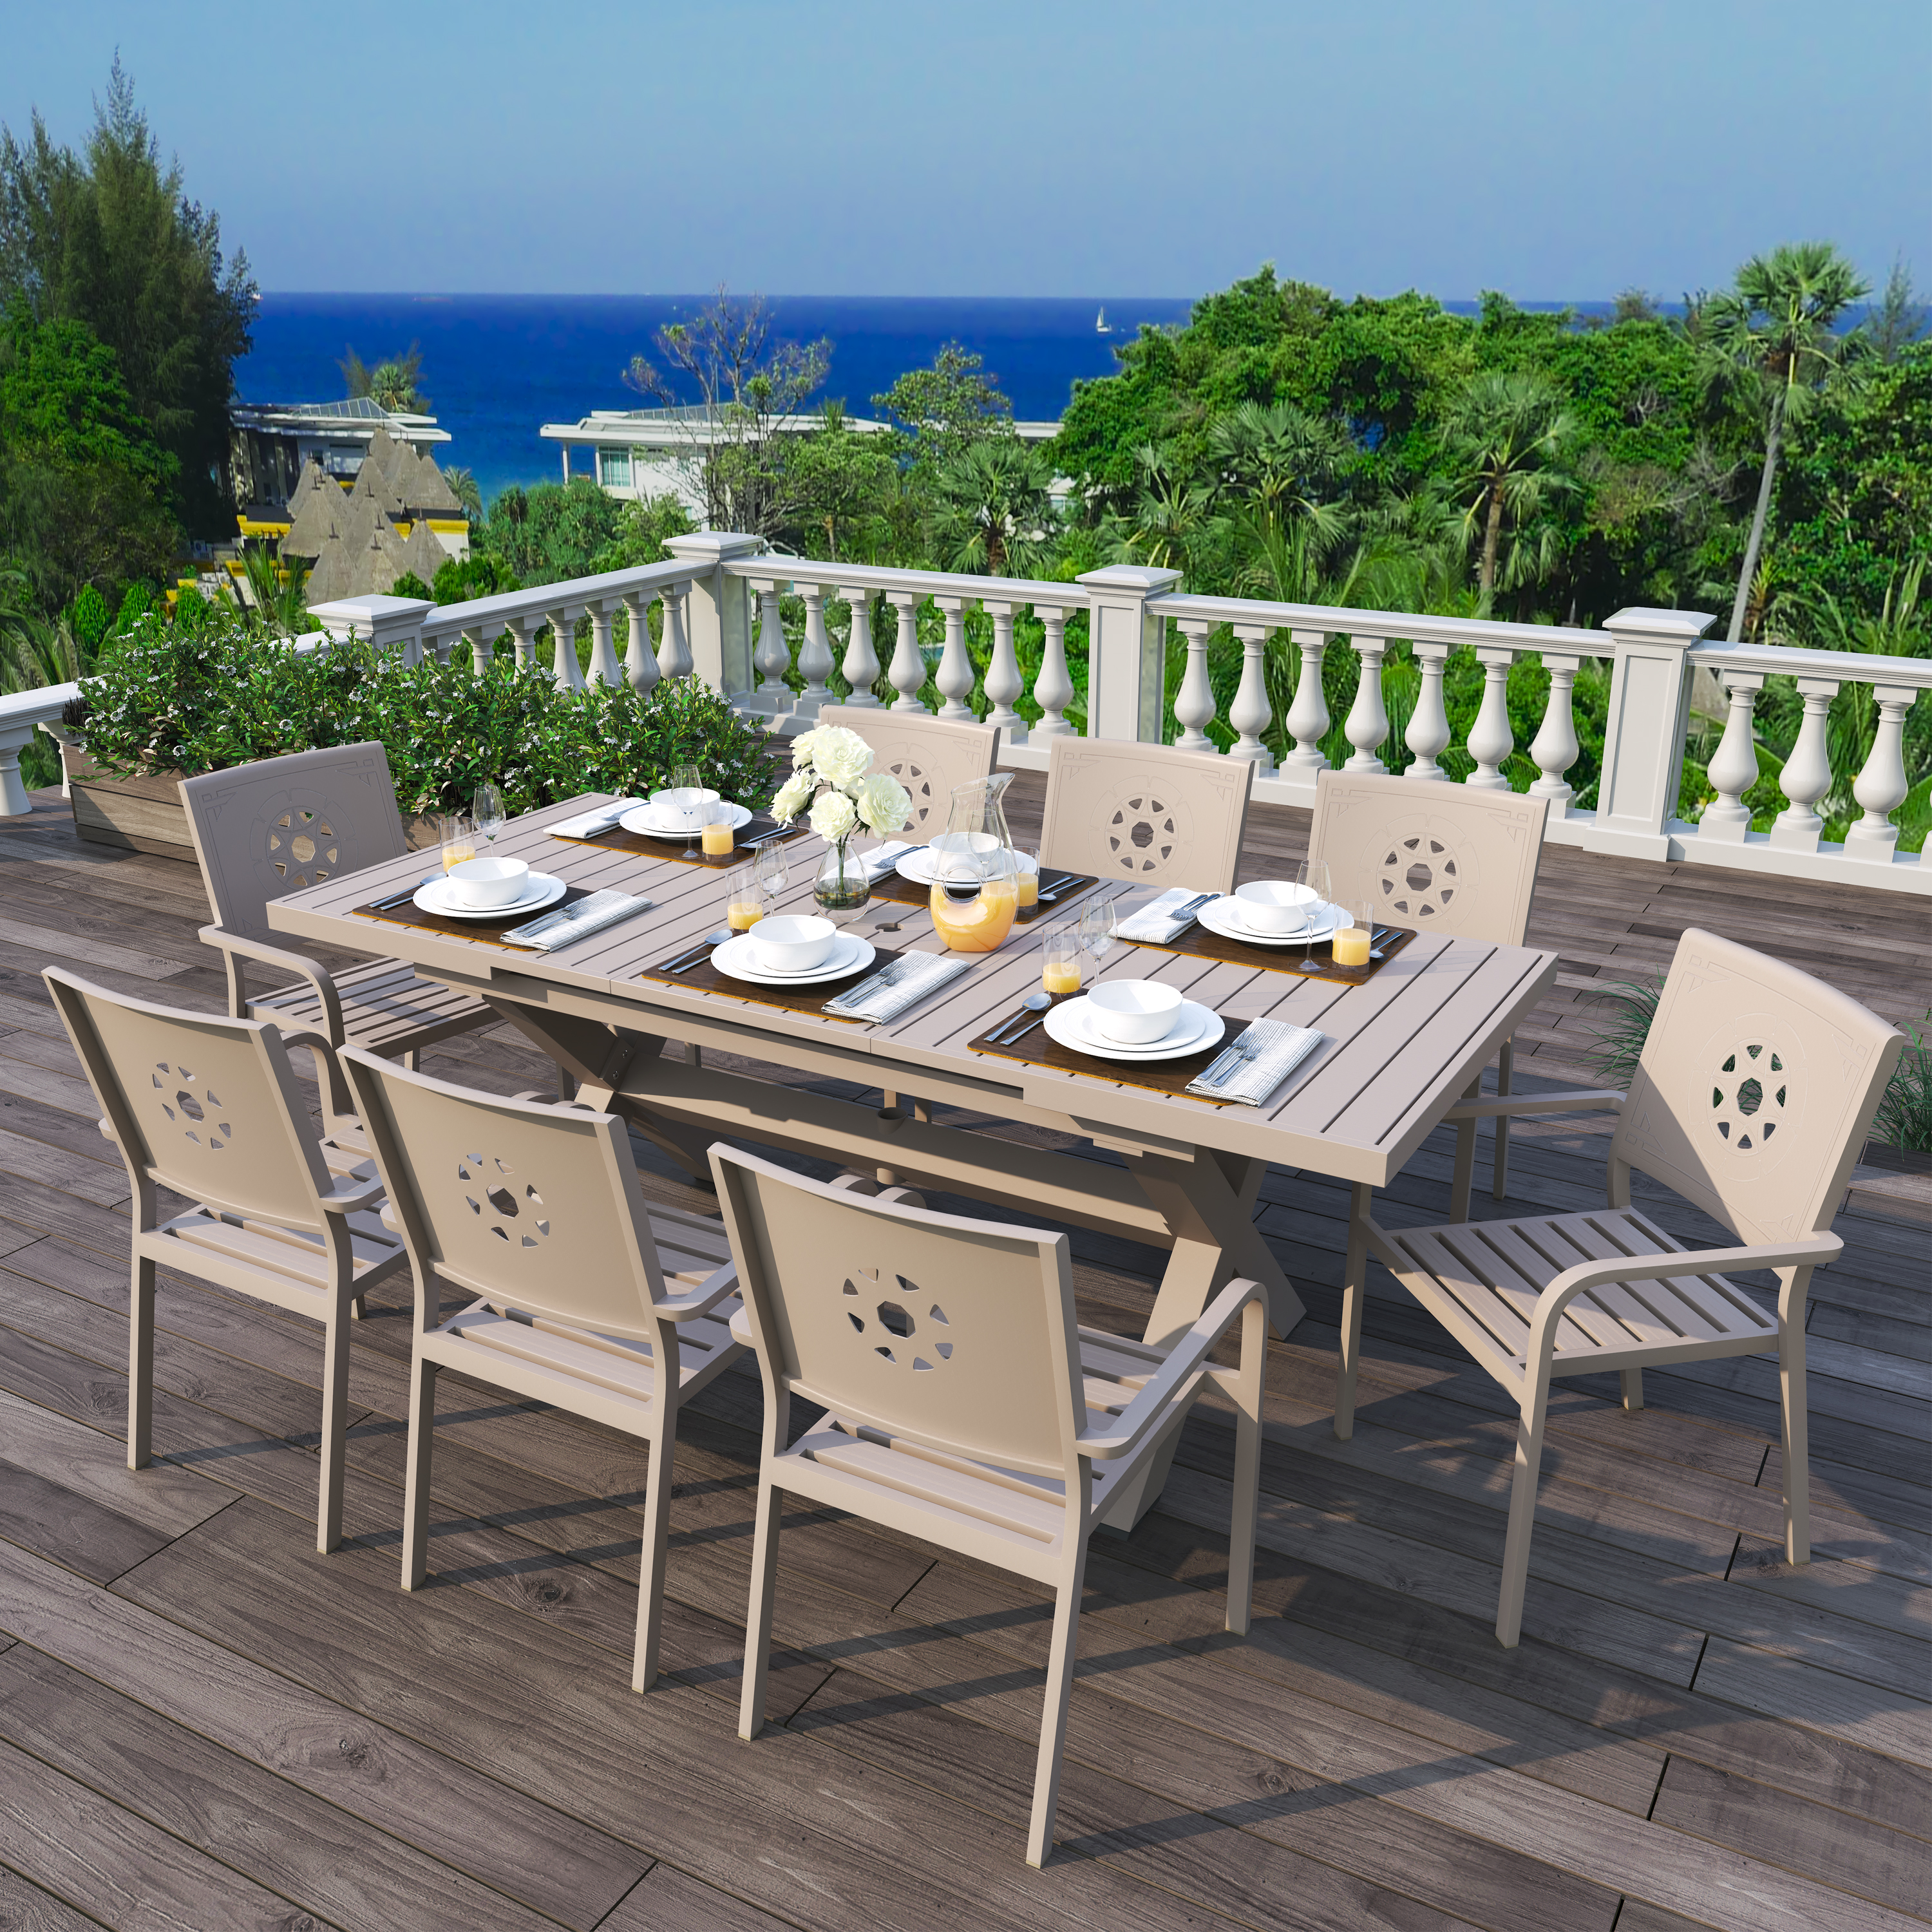 What defines outdoor furniture?